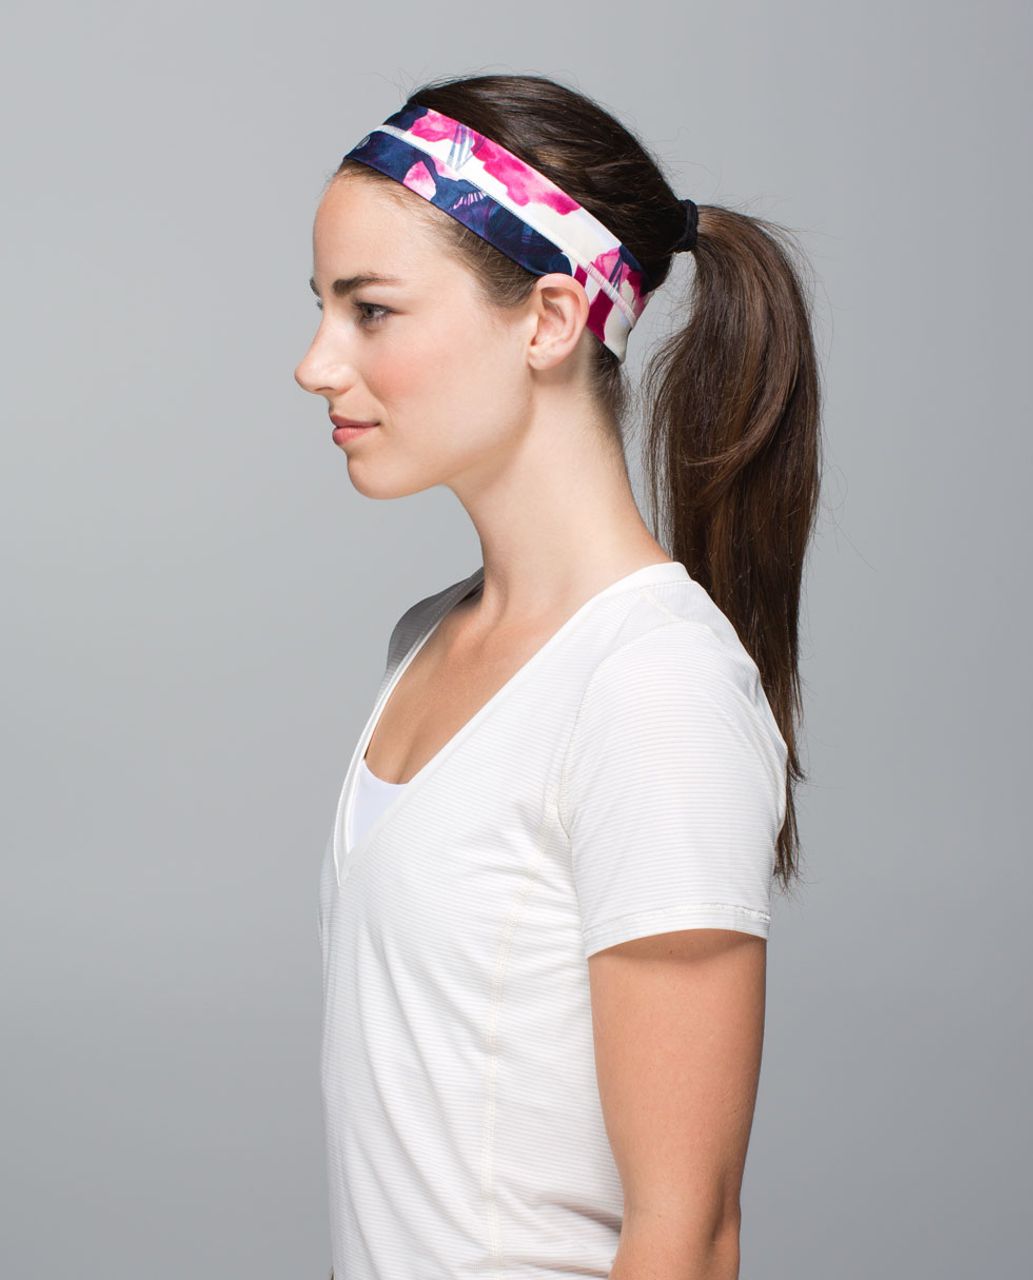 Lululemon Fly Away Tamer Headband - Inky Floral Ghost Inkwell Bumble Berry